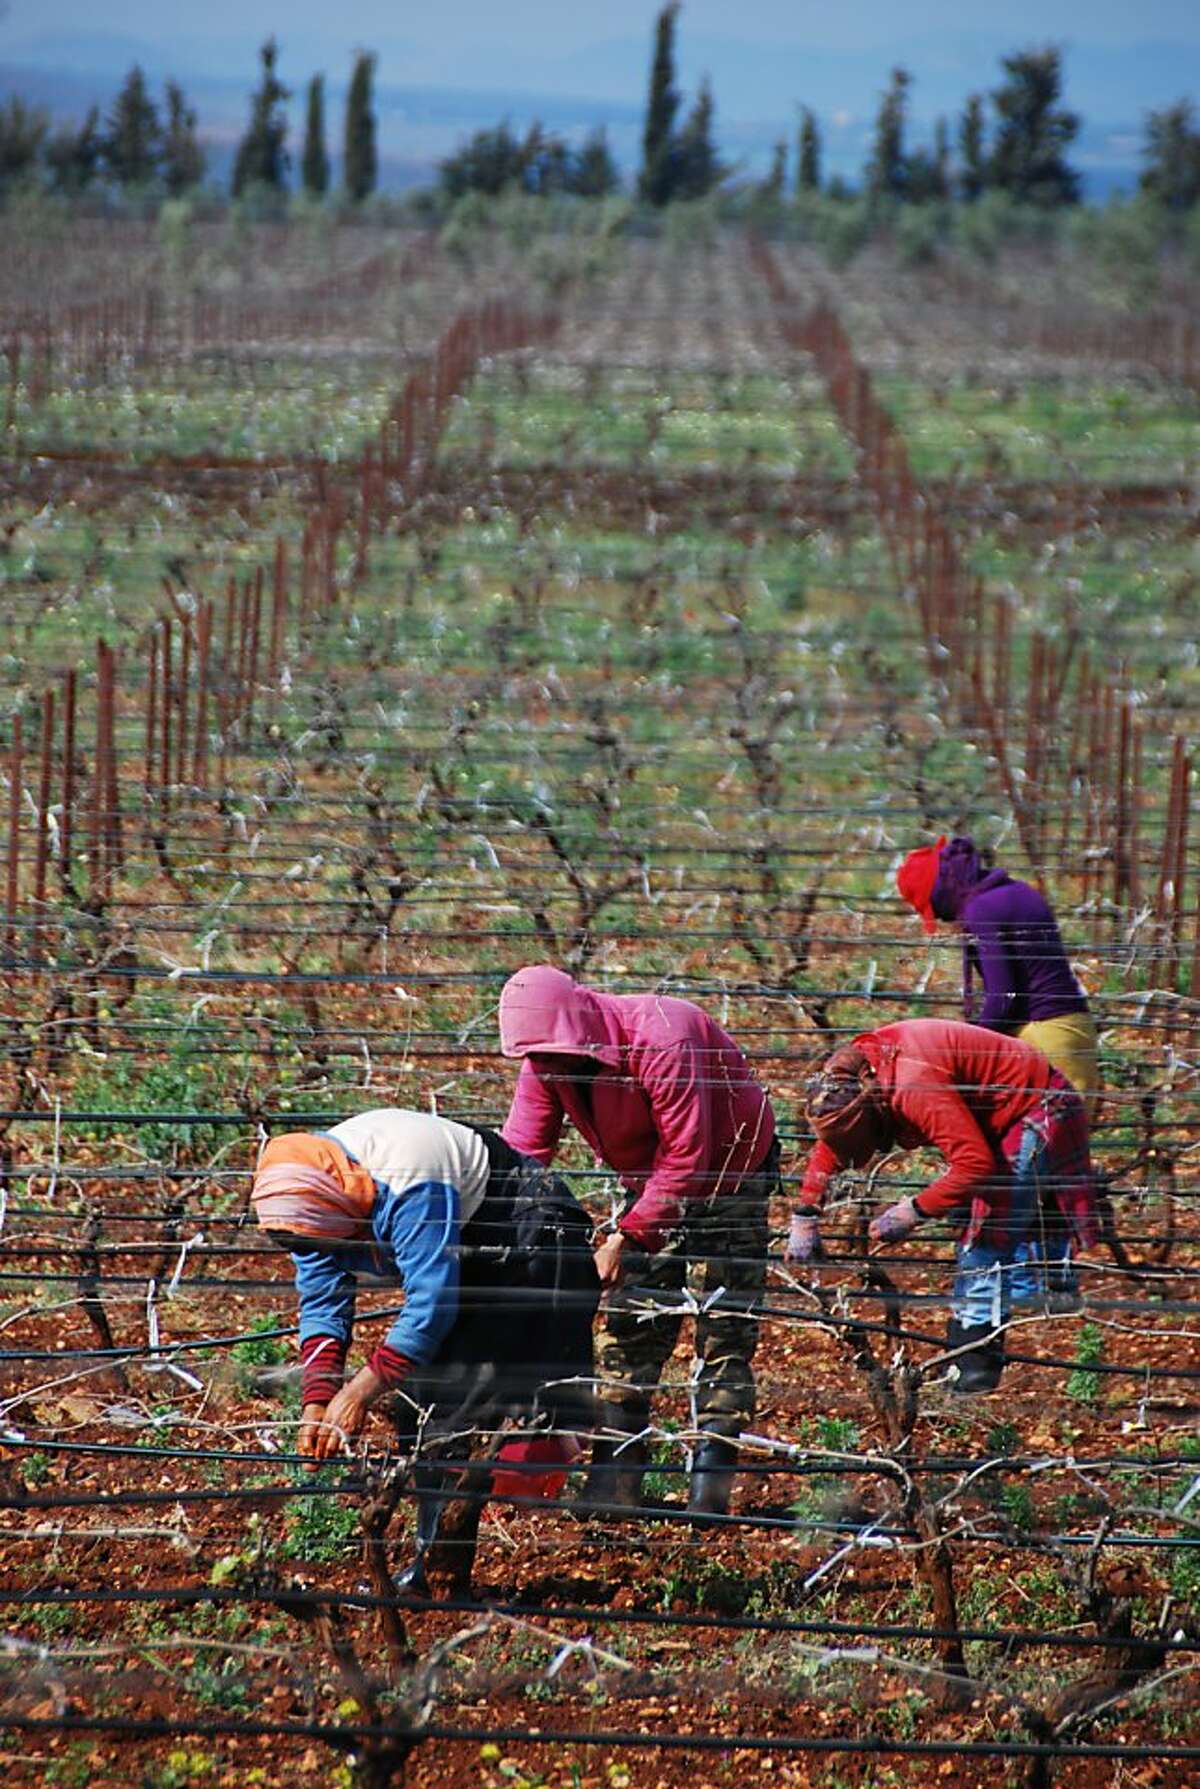 The Guerrouane region near Meknes has prime land for growing grapes in Morocco. Free from the appellations system that control vineyard plantings in France, French winegrowers enjoy the freedom to experiment in Morocco. They opt for heat-tolerant varieties, such as syrah and tempranillo.